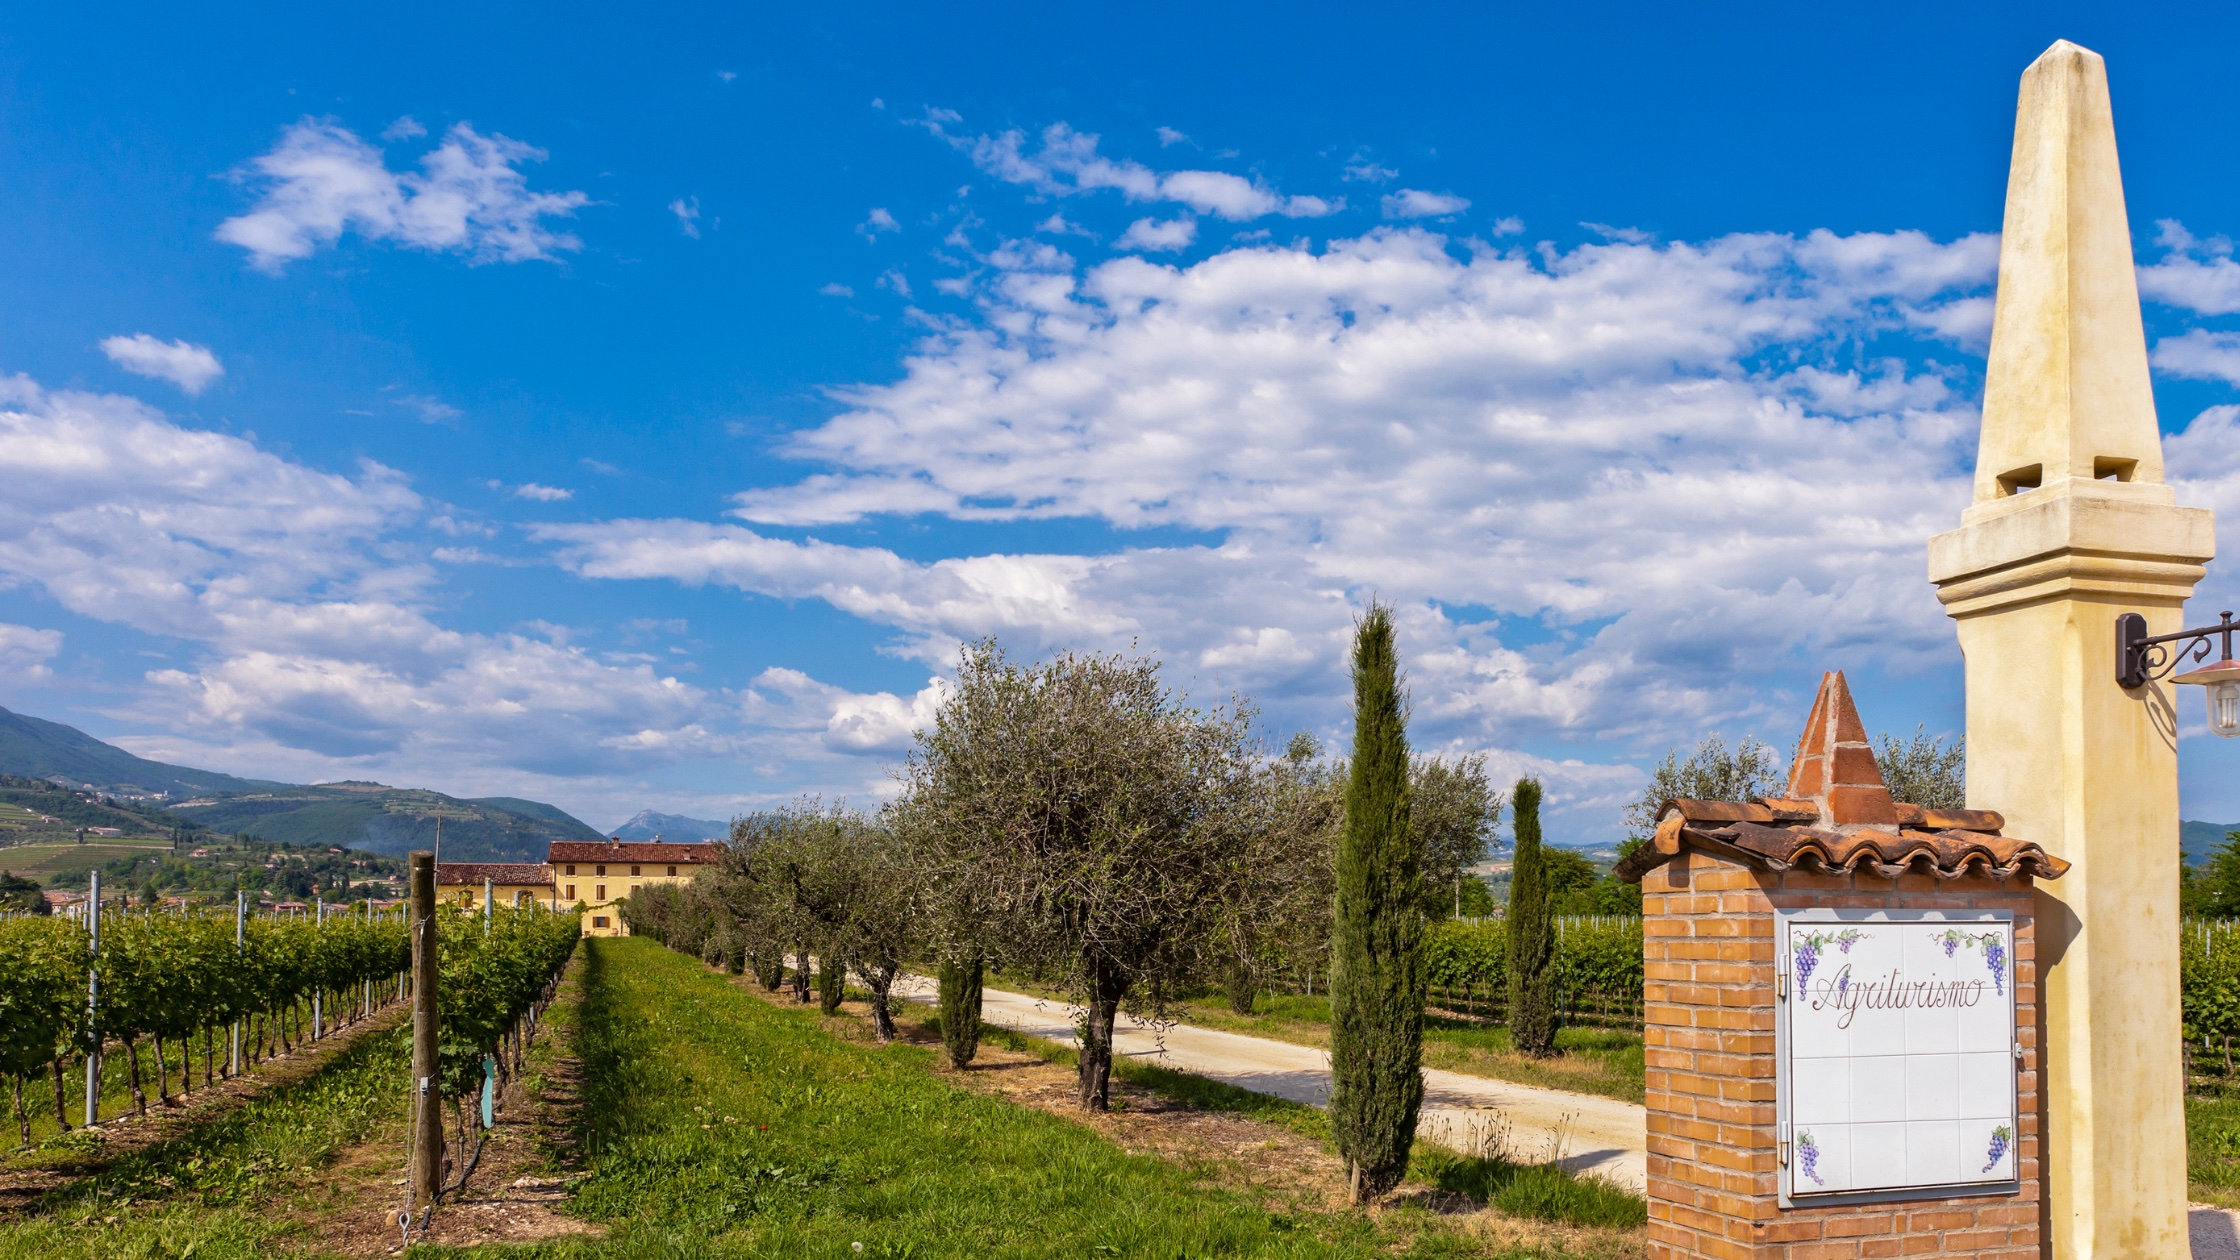 What is an Agriturismo?